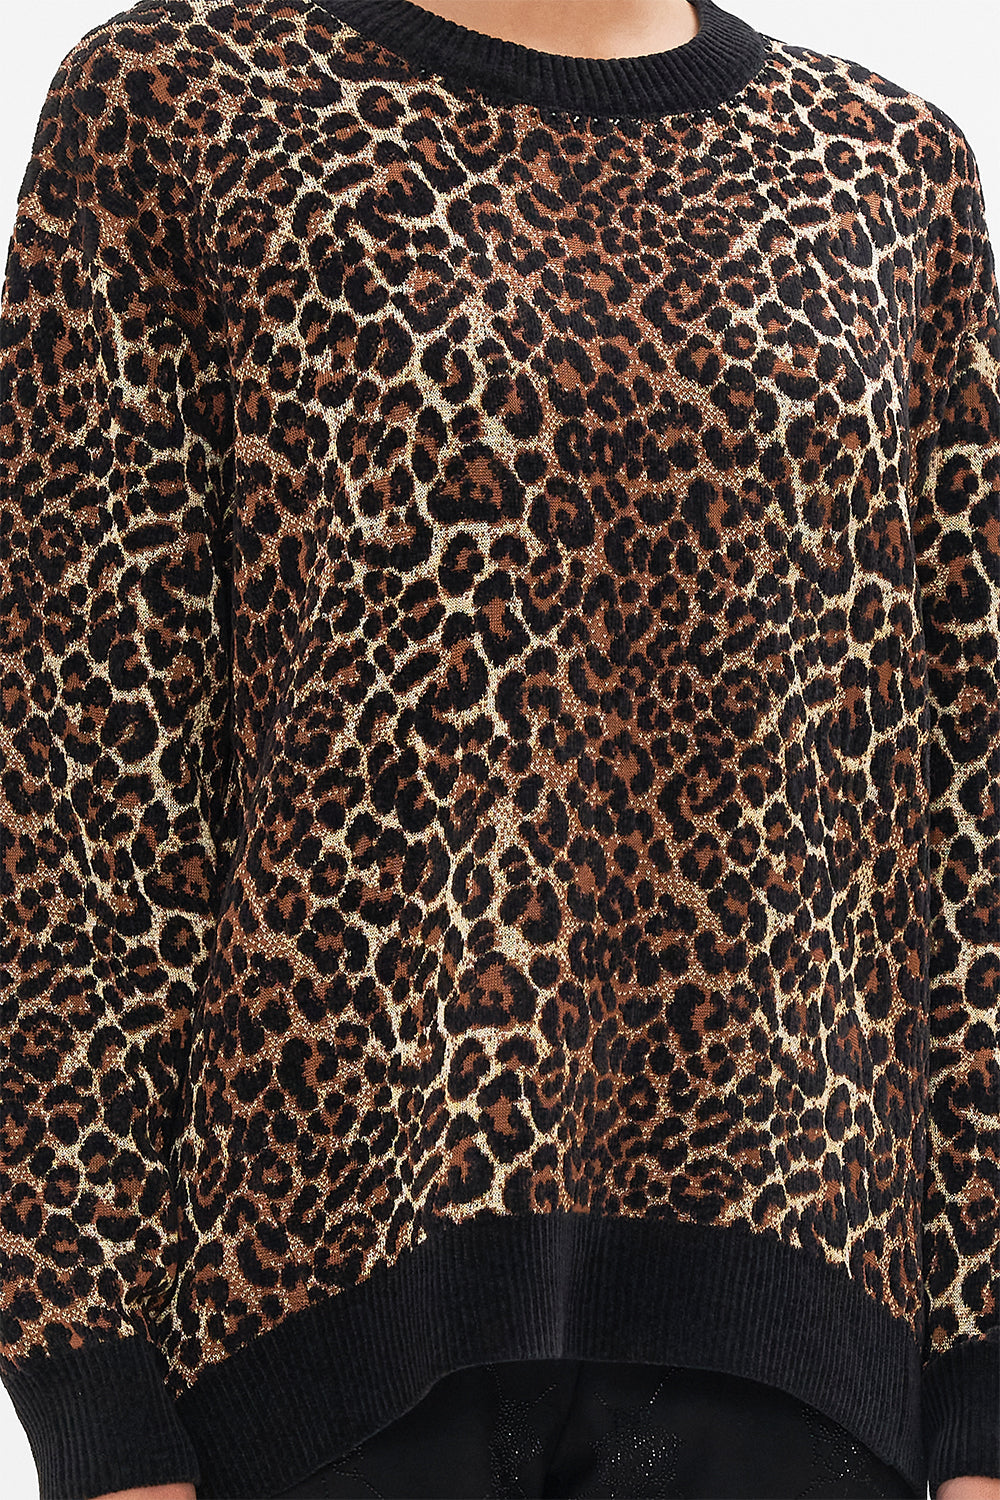 CAMILLA Leopard Crew Neck Oversized Knit in Amsterglam